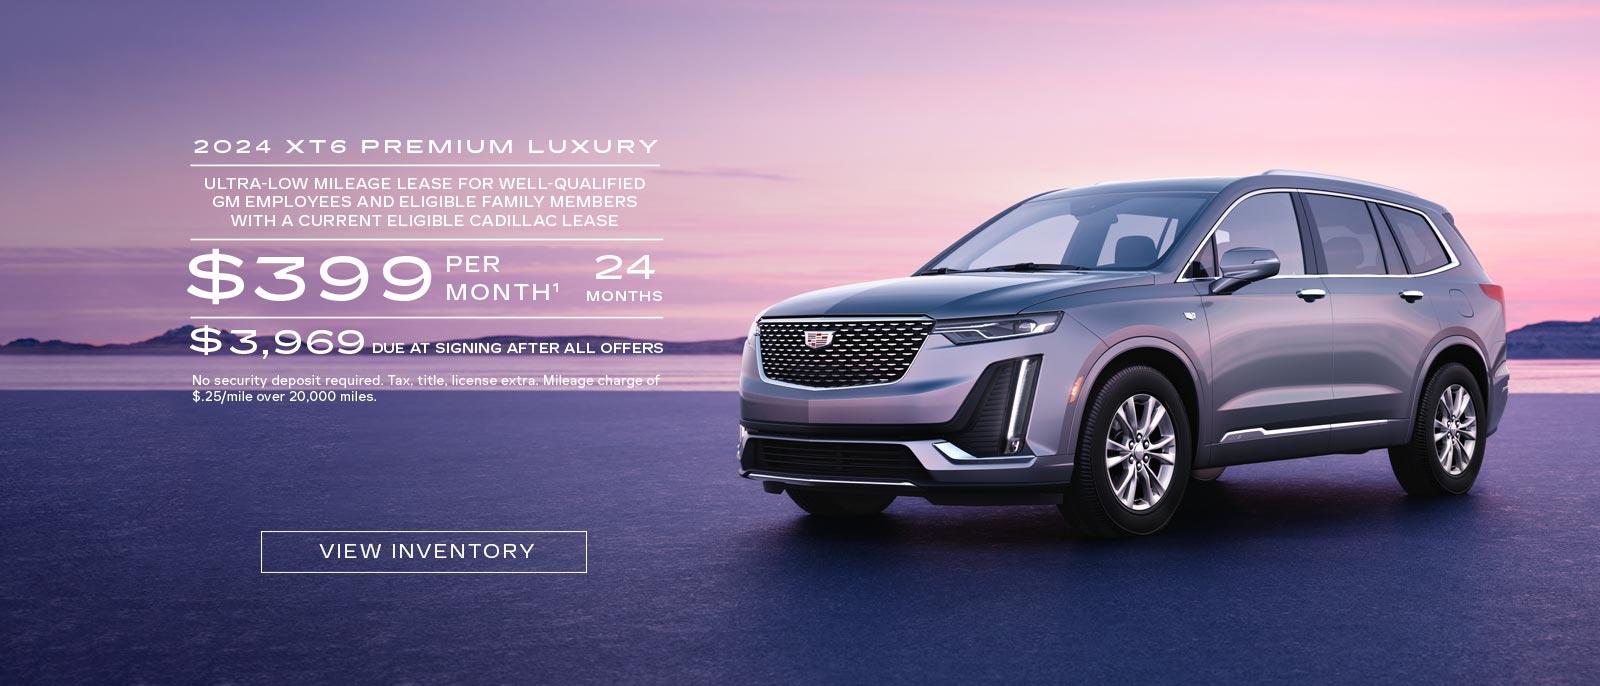 2024 XT6 Premium Luxury. Ultra-low mileage lease forfor well-qualified current eligible GM employees and eligible family members with a current eligible Cadillac lease. $399 per month. 24 months. $3,969 due at signing after all offers.